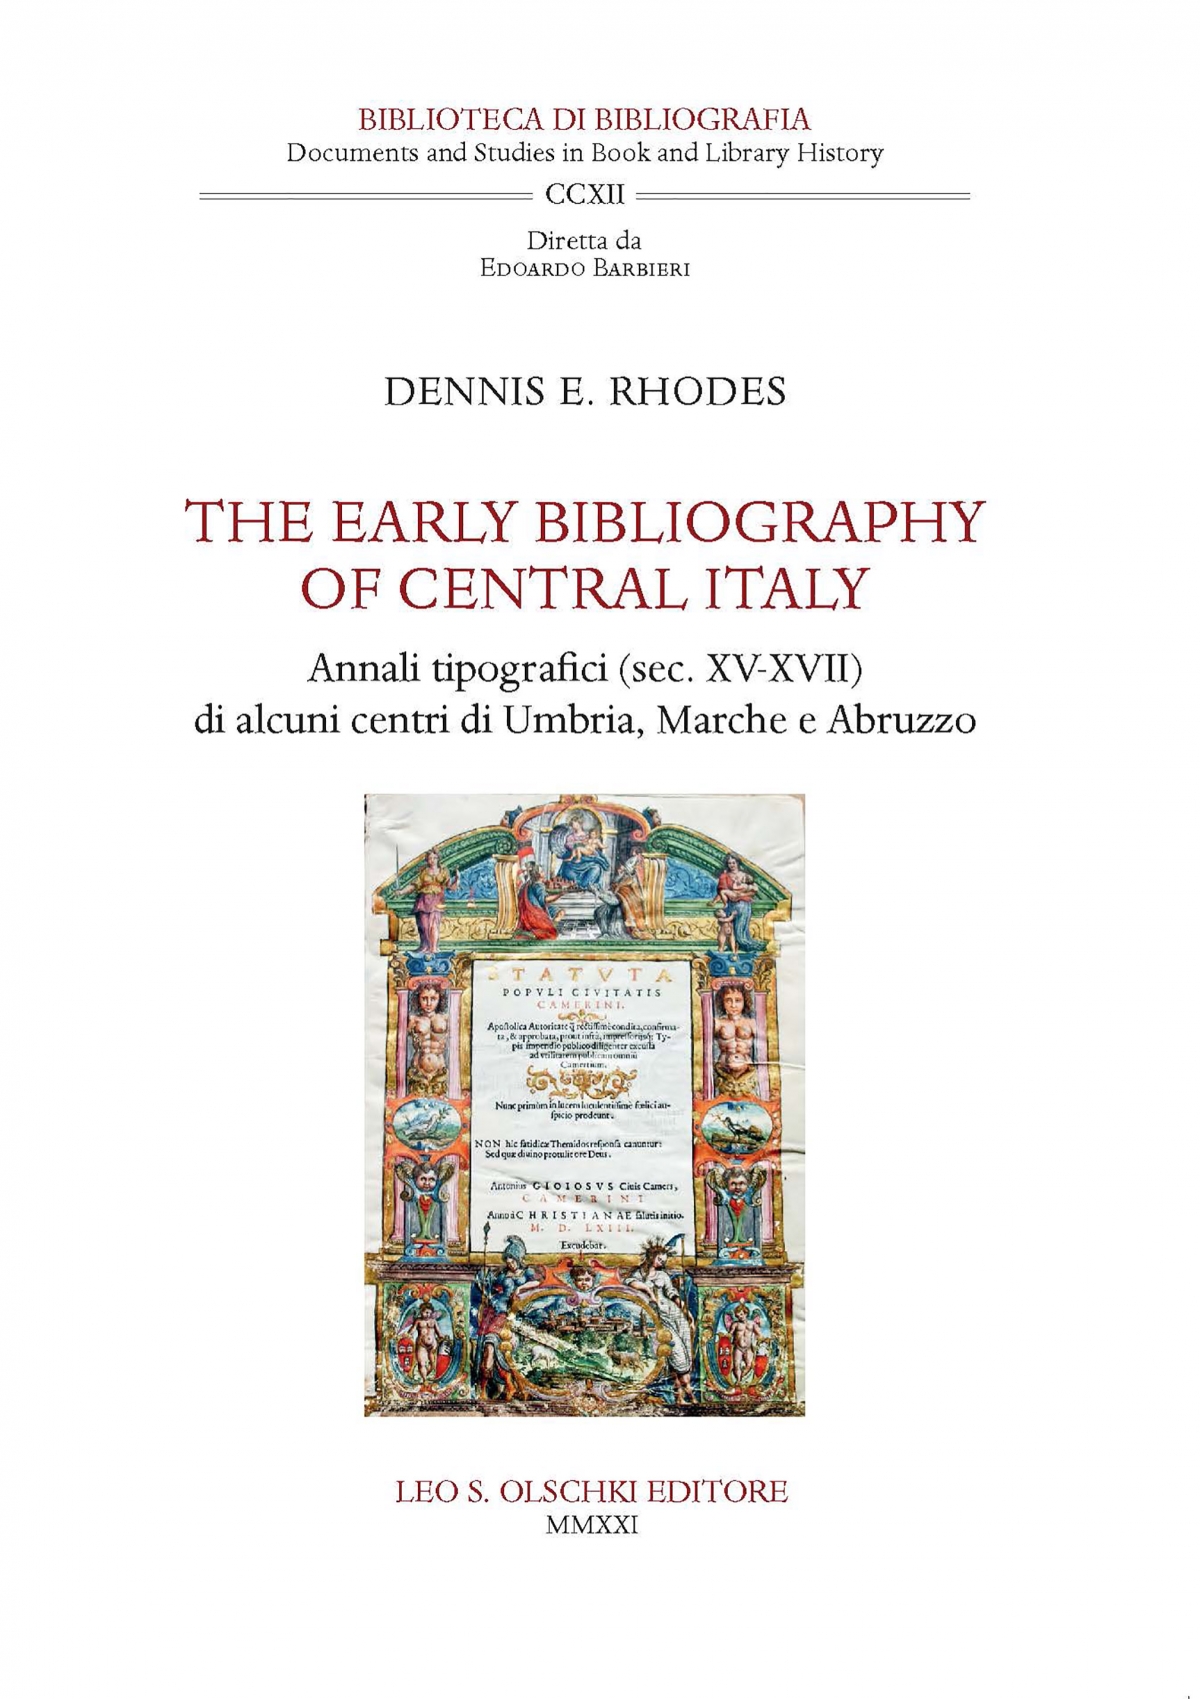 The Early bibliography of Central Italy